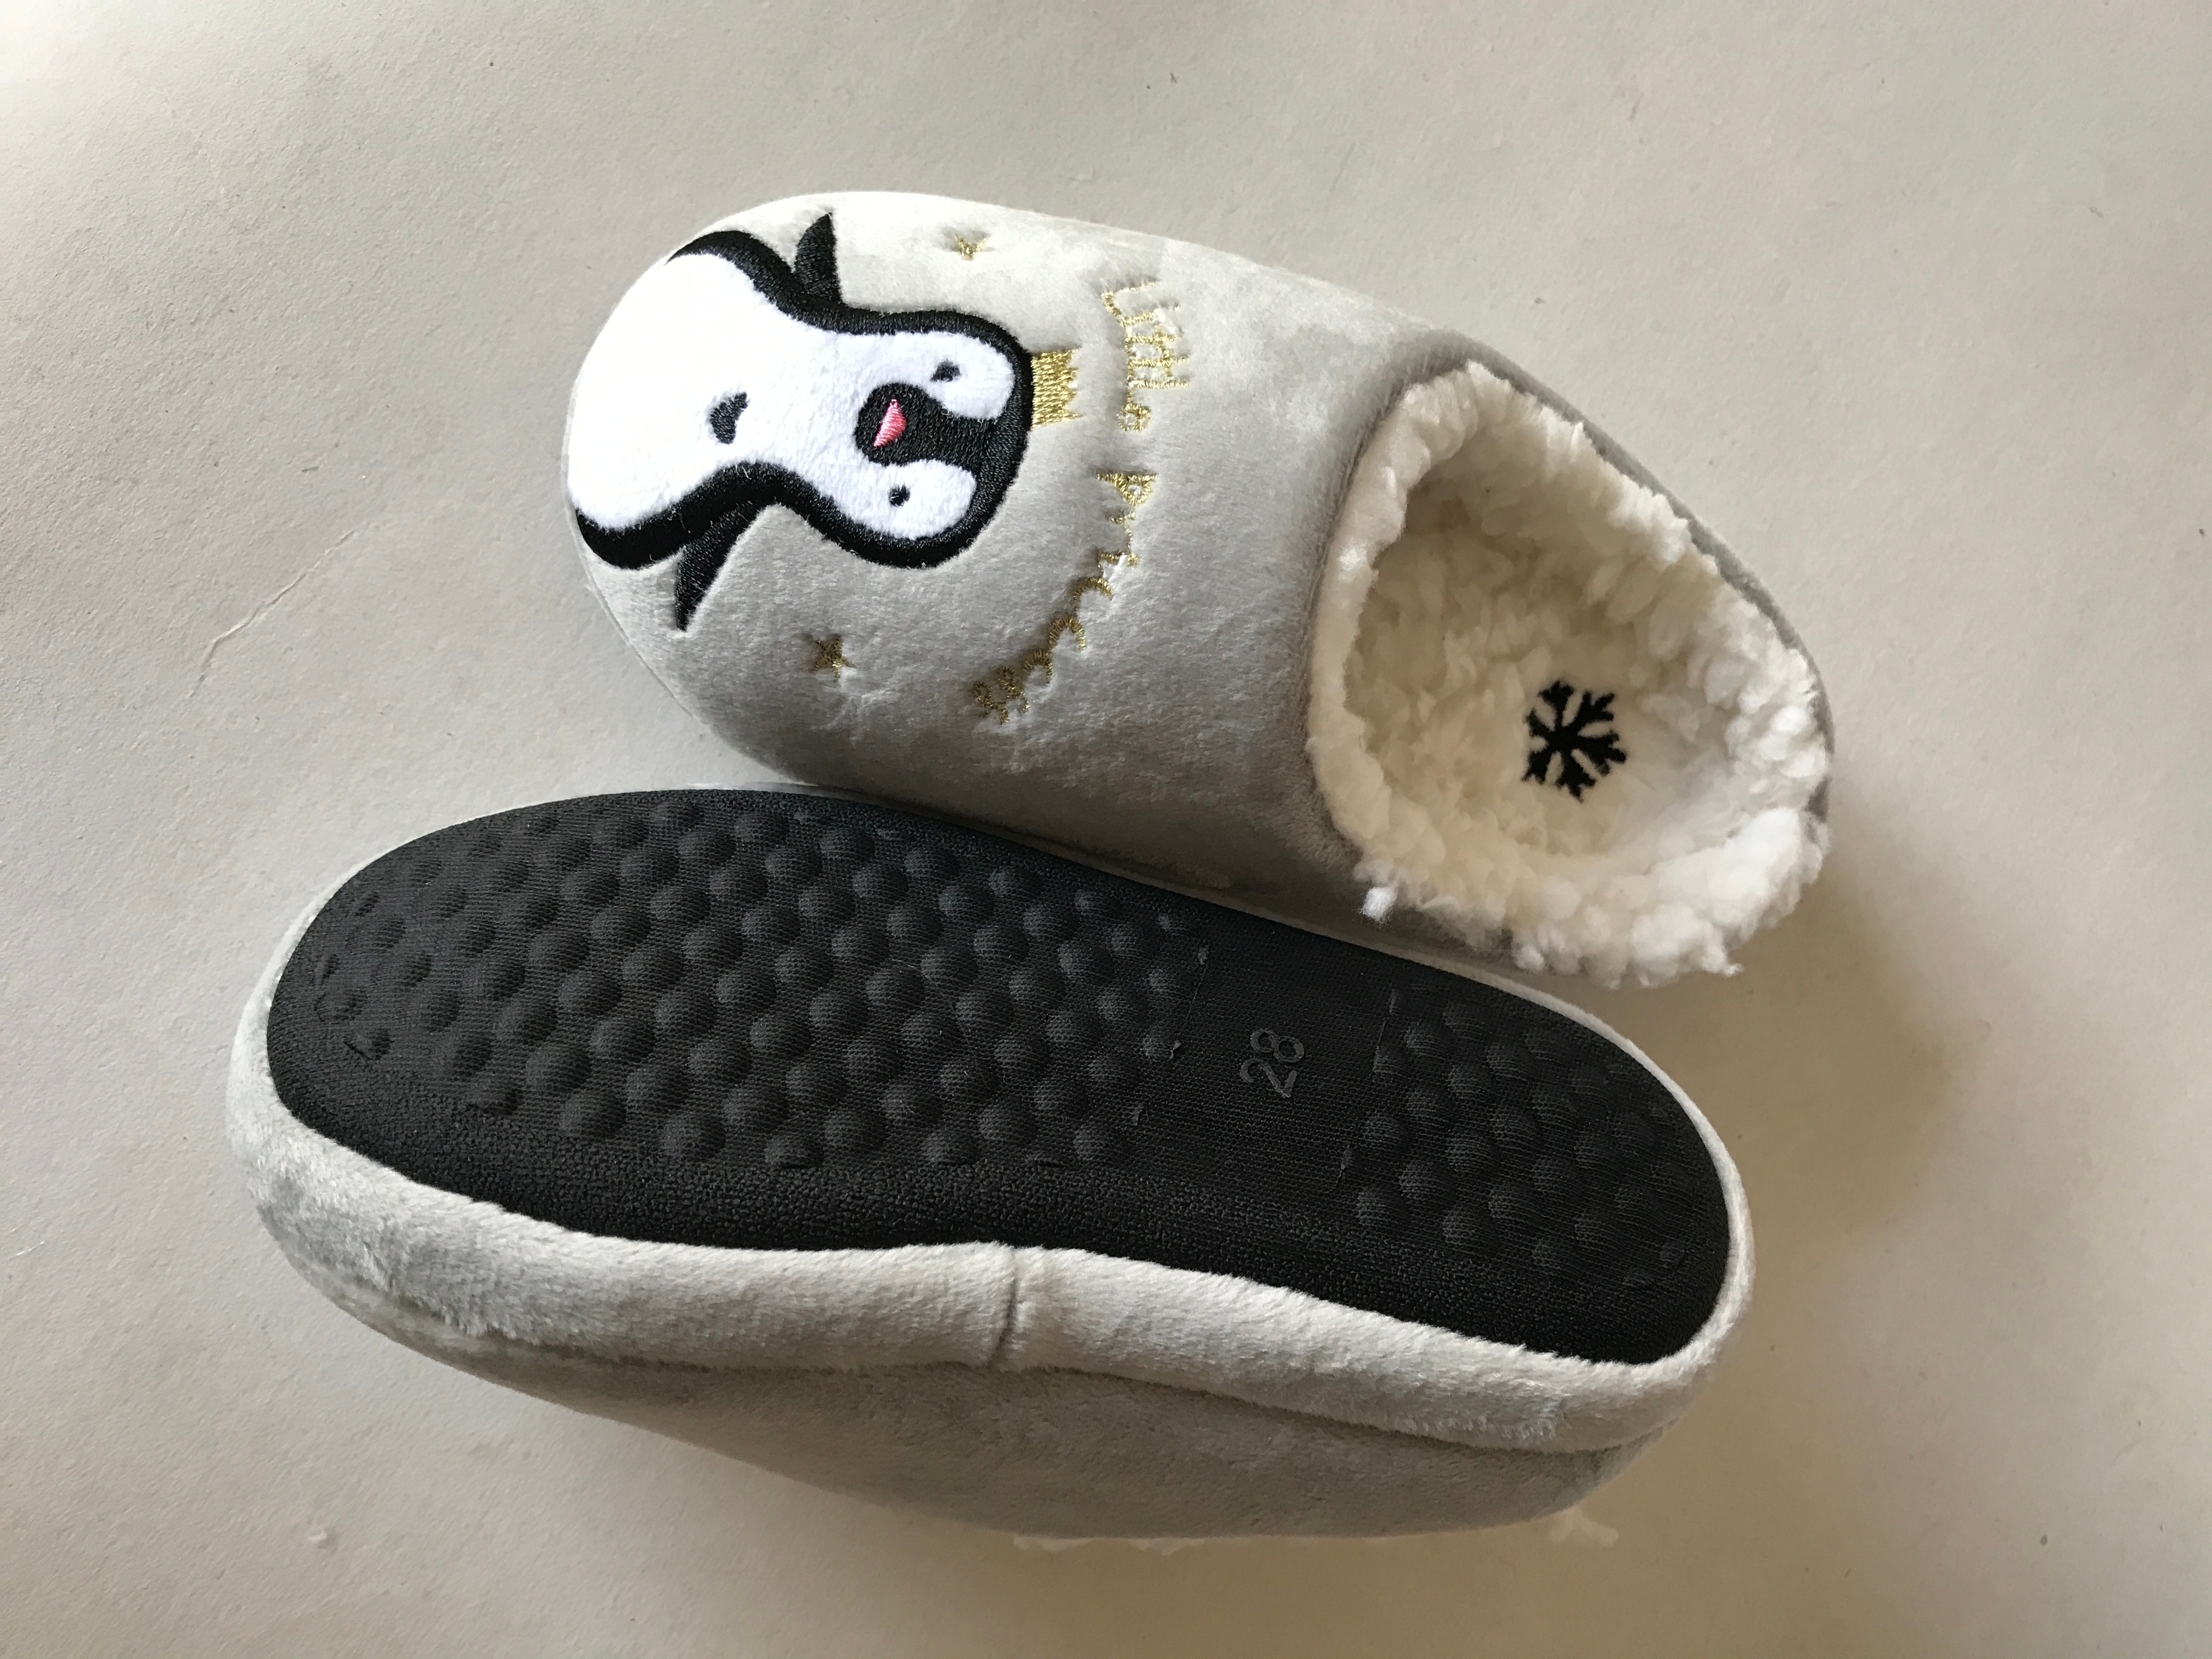 Kids' Chilren's Comfy Warm Slide on House Slipper with Penguin Embroidery